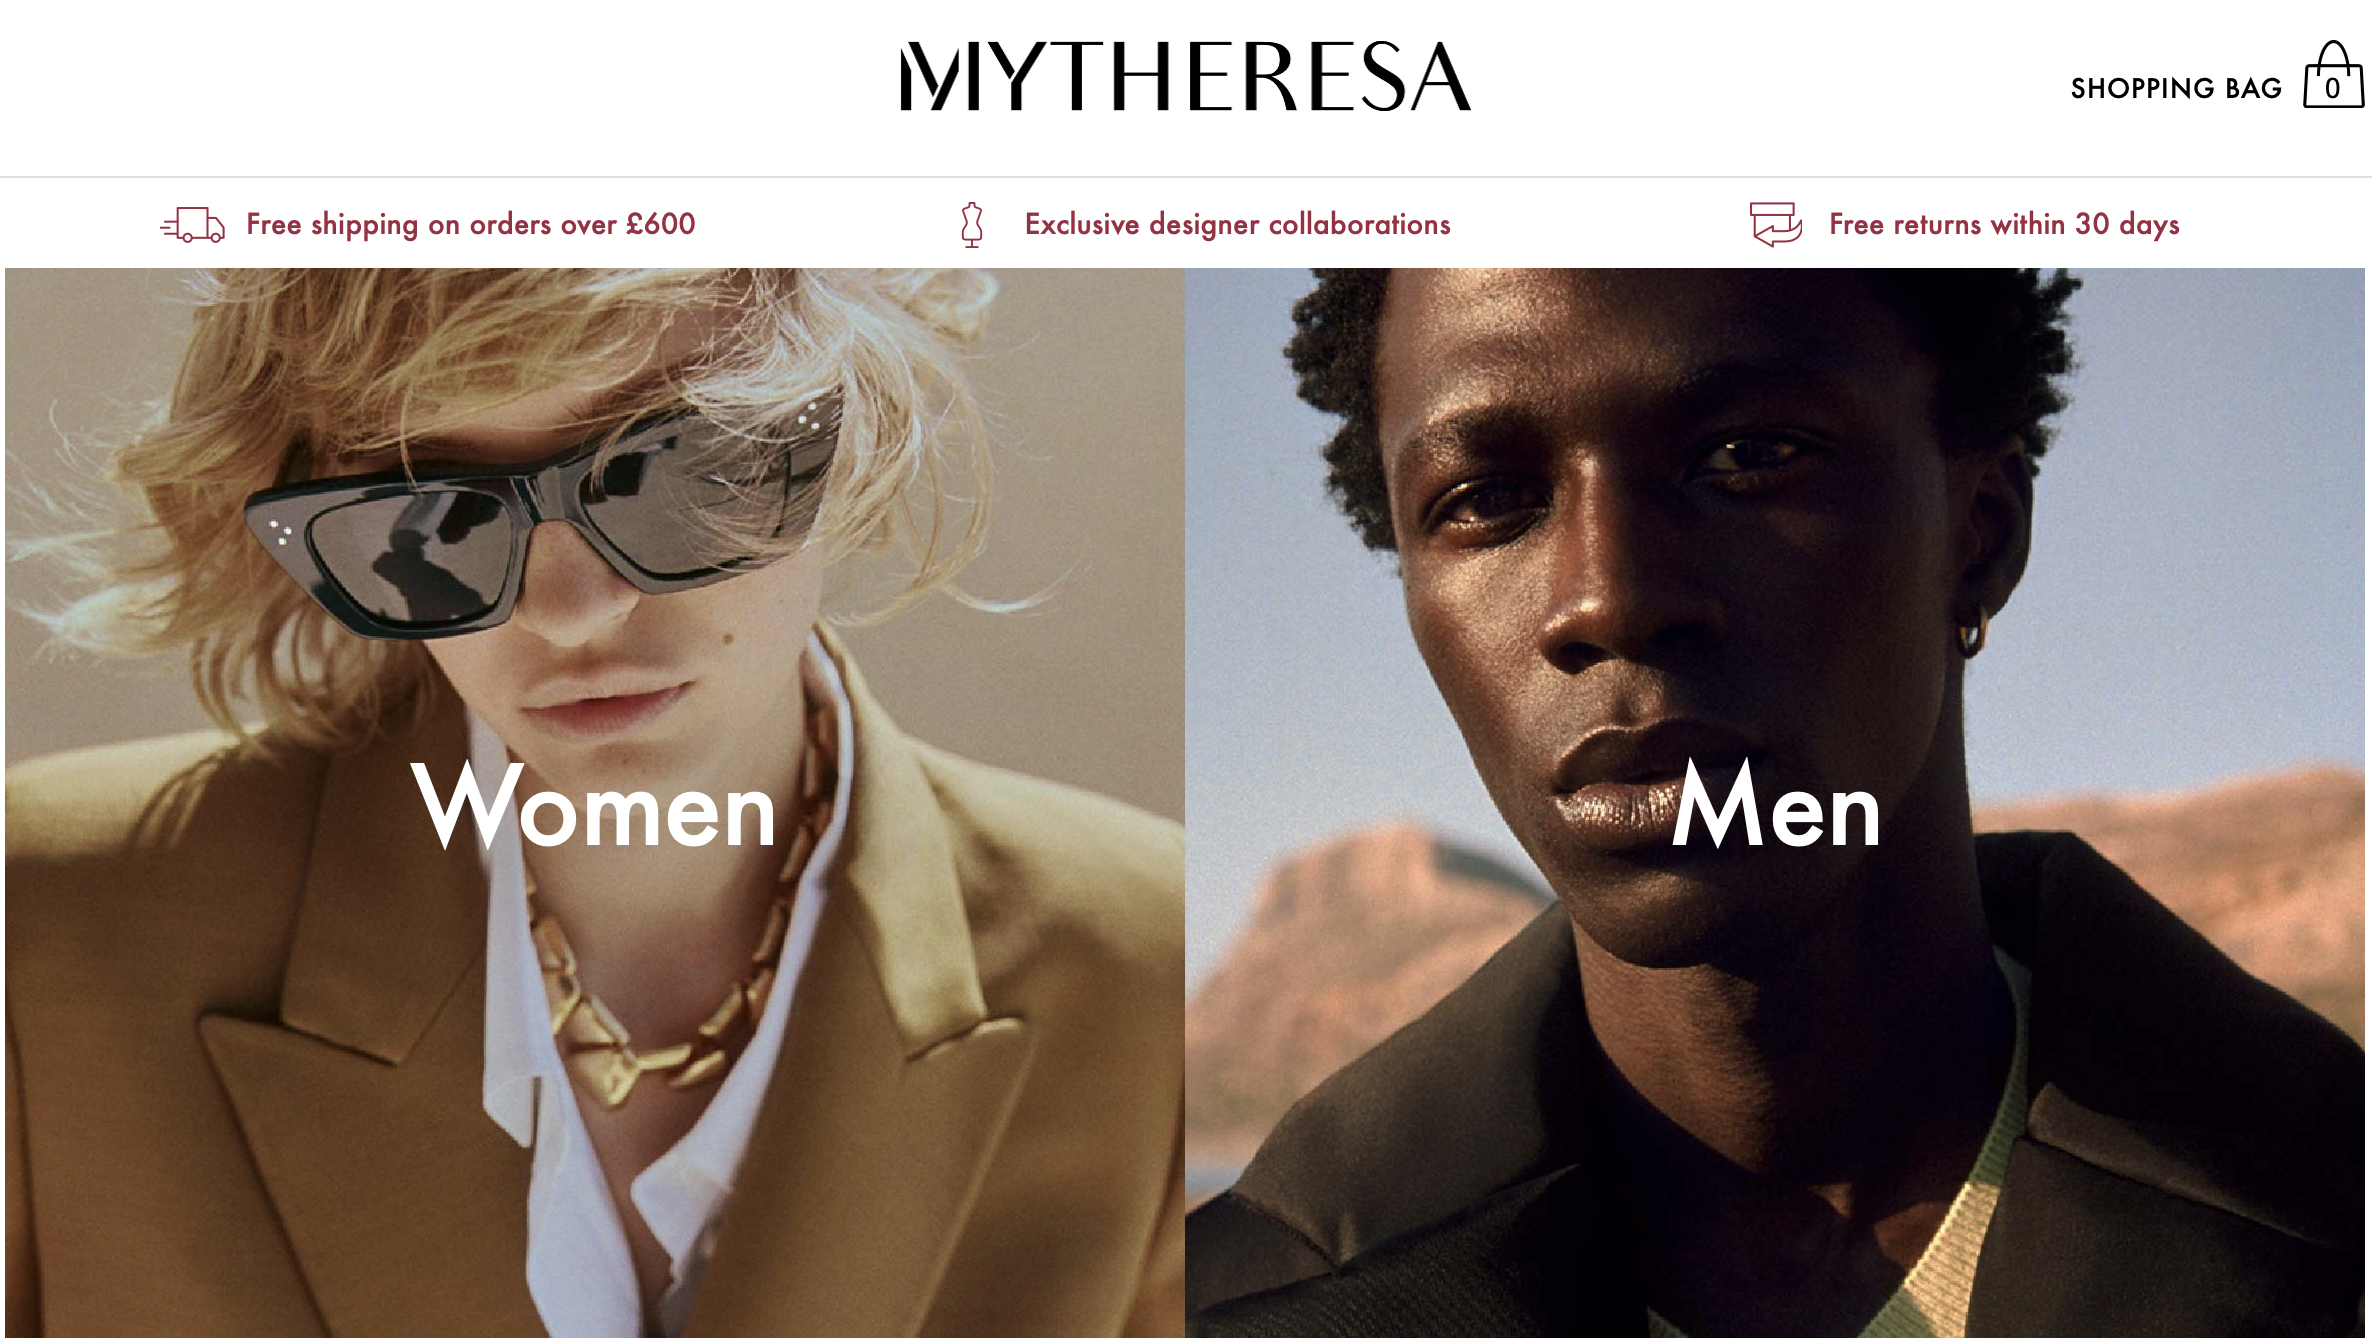 Mytheresa Shifts Focus to Top-End Clientele, Records Nearly 8% Gmv Growth Last Quarter